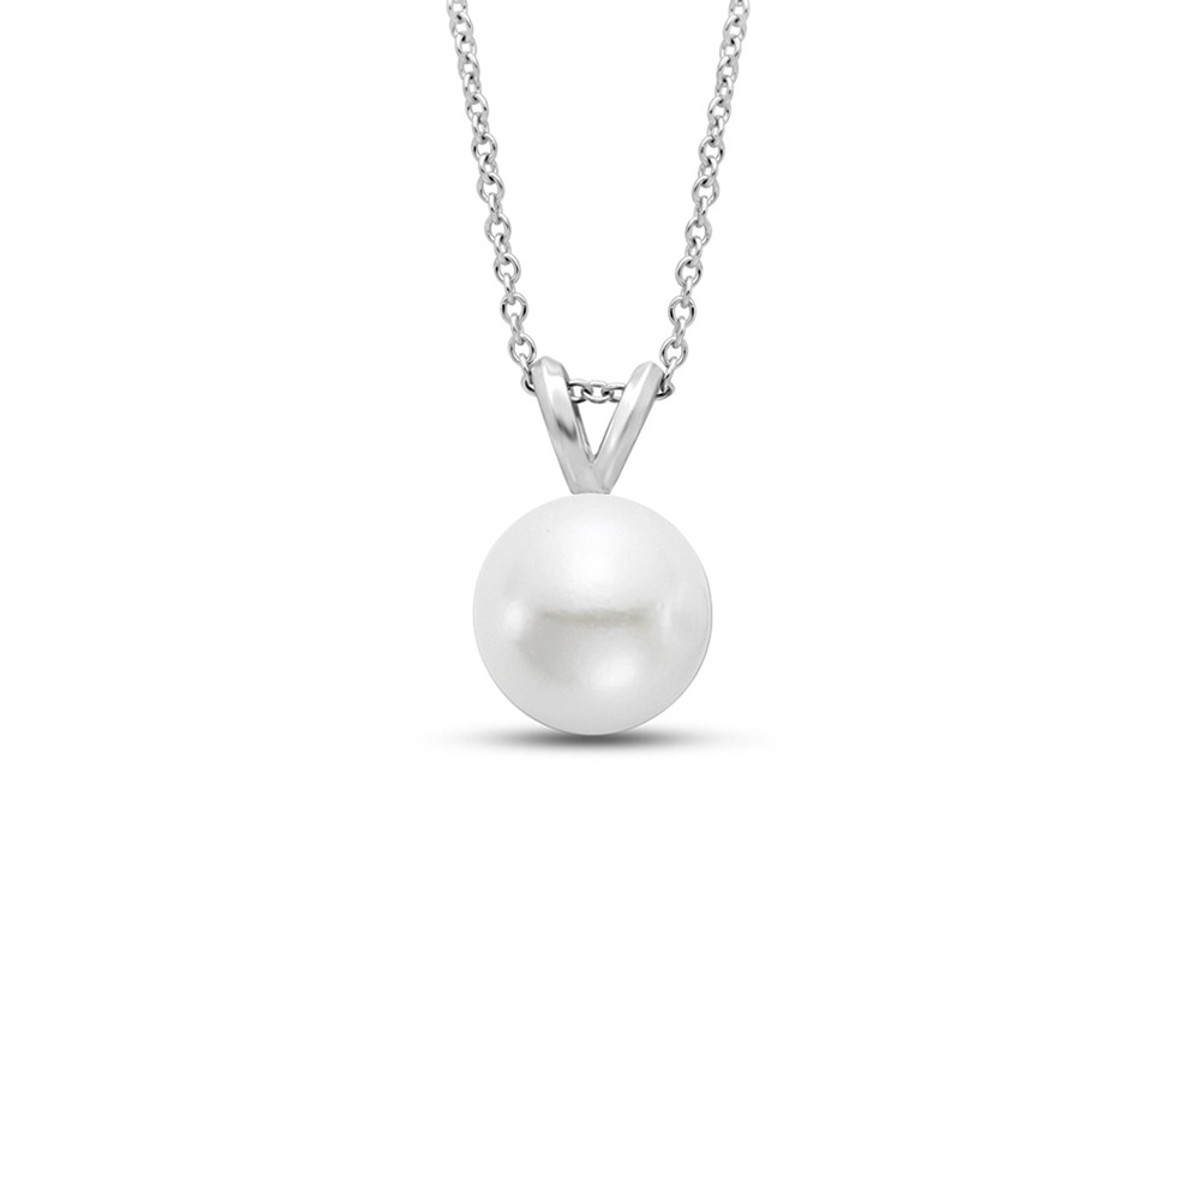 Hyde Park 18K White Gold Pearl Pendant. 6-6.5MM. A Grade Akoya Pearl.-25799 Product Image